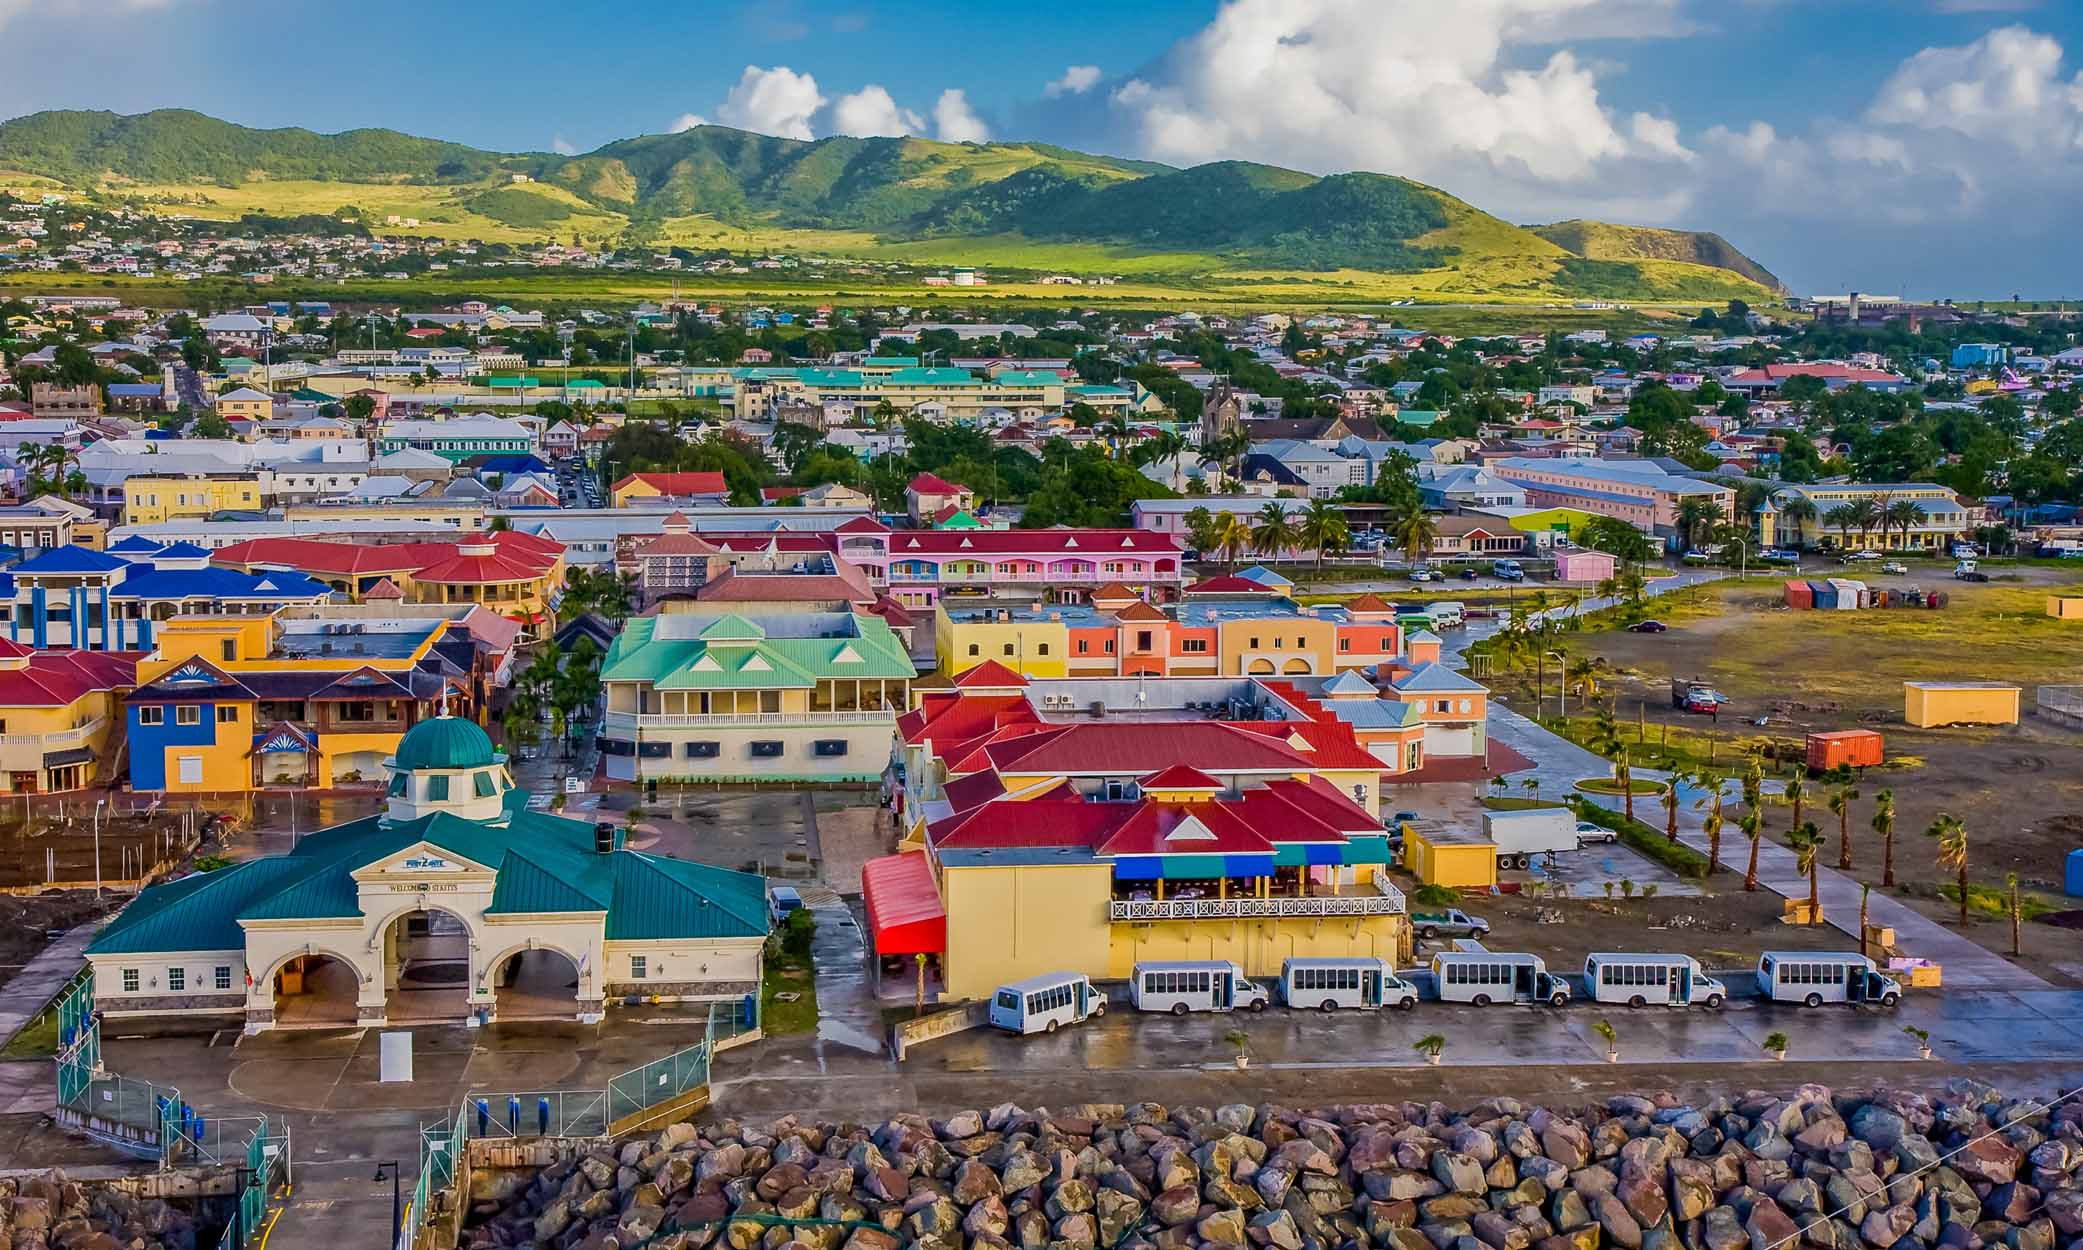 St Kitts is full of colour and life.